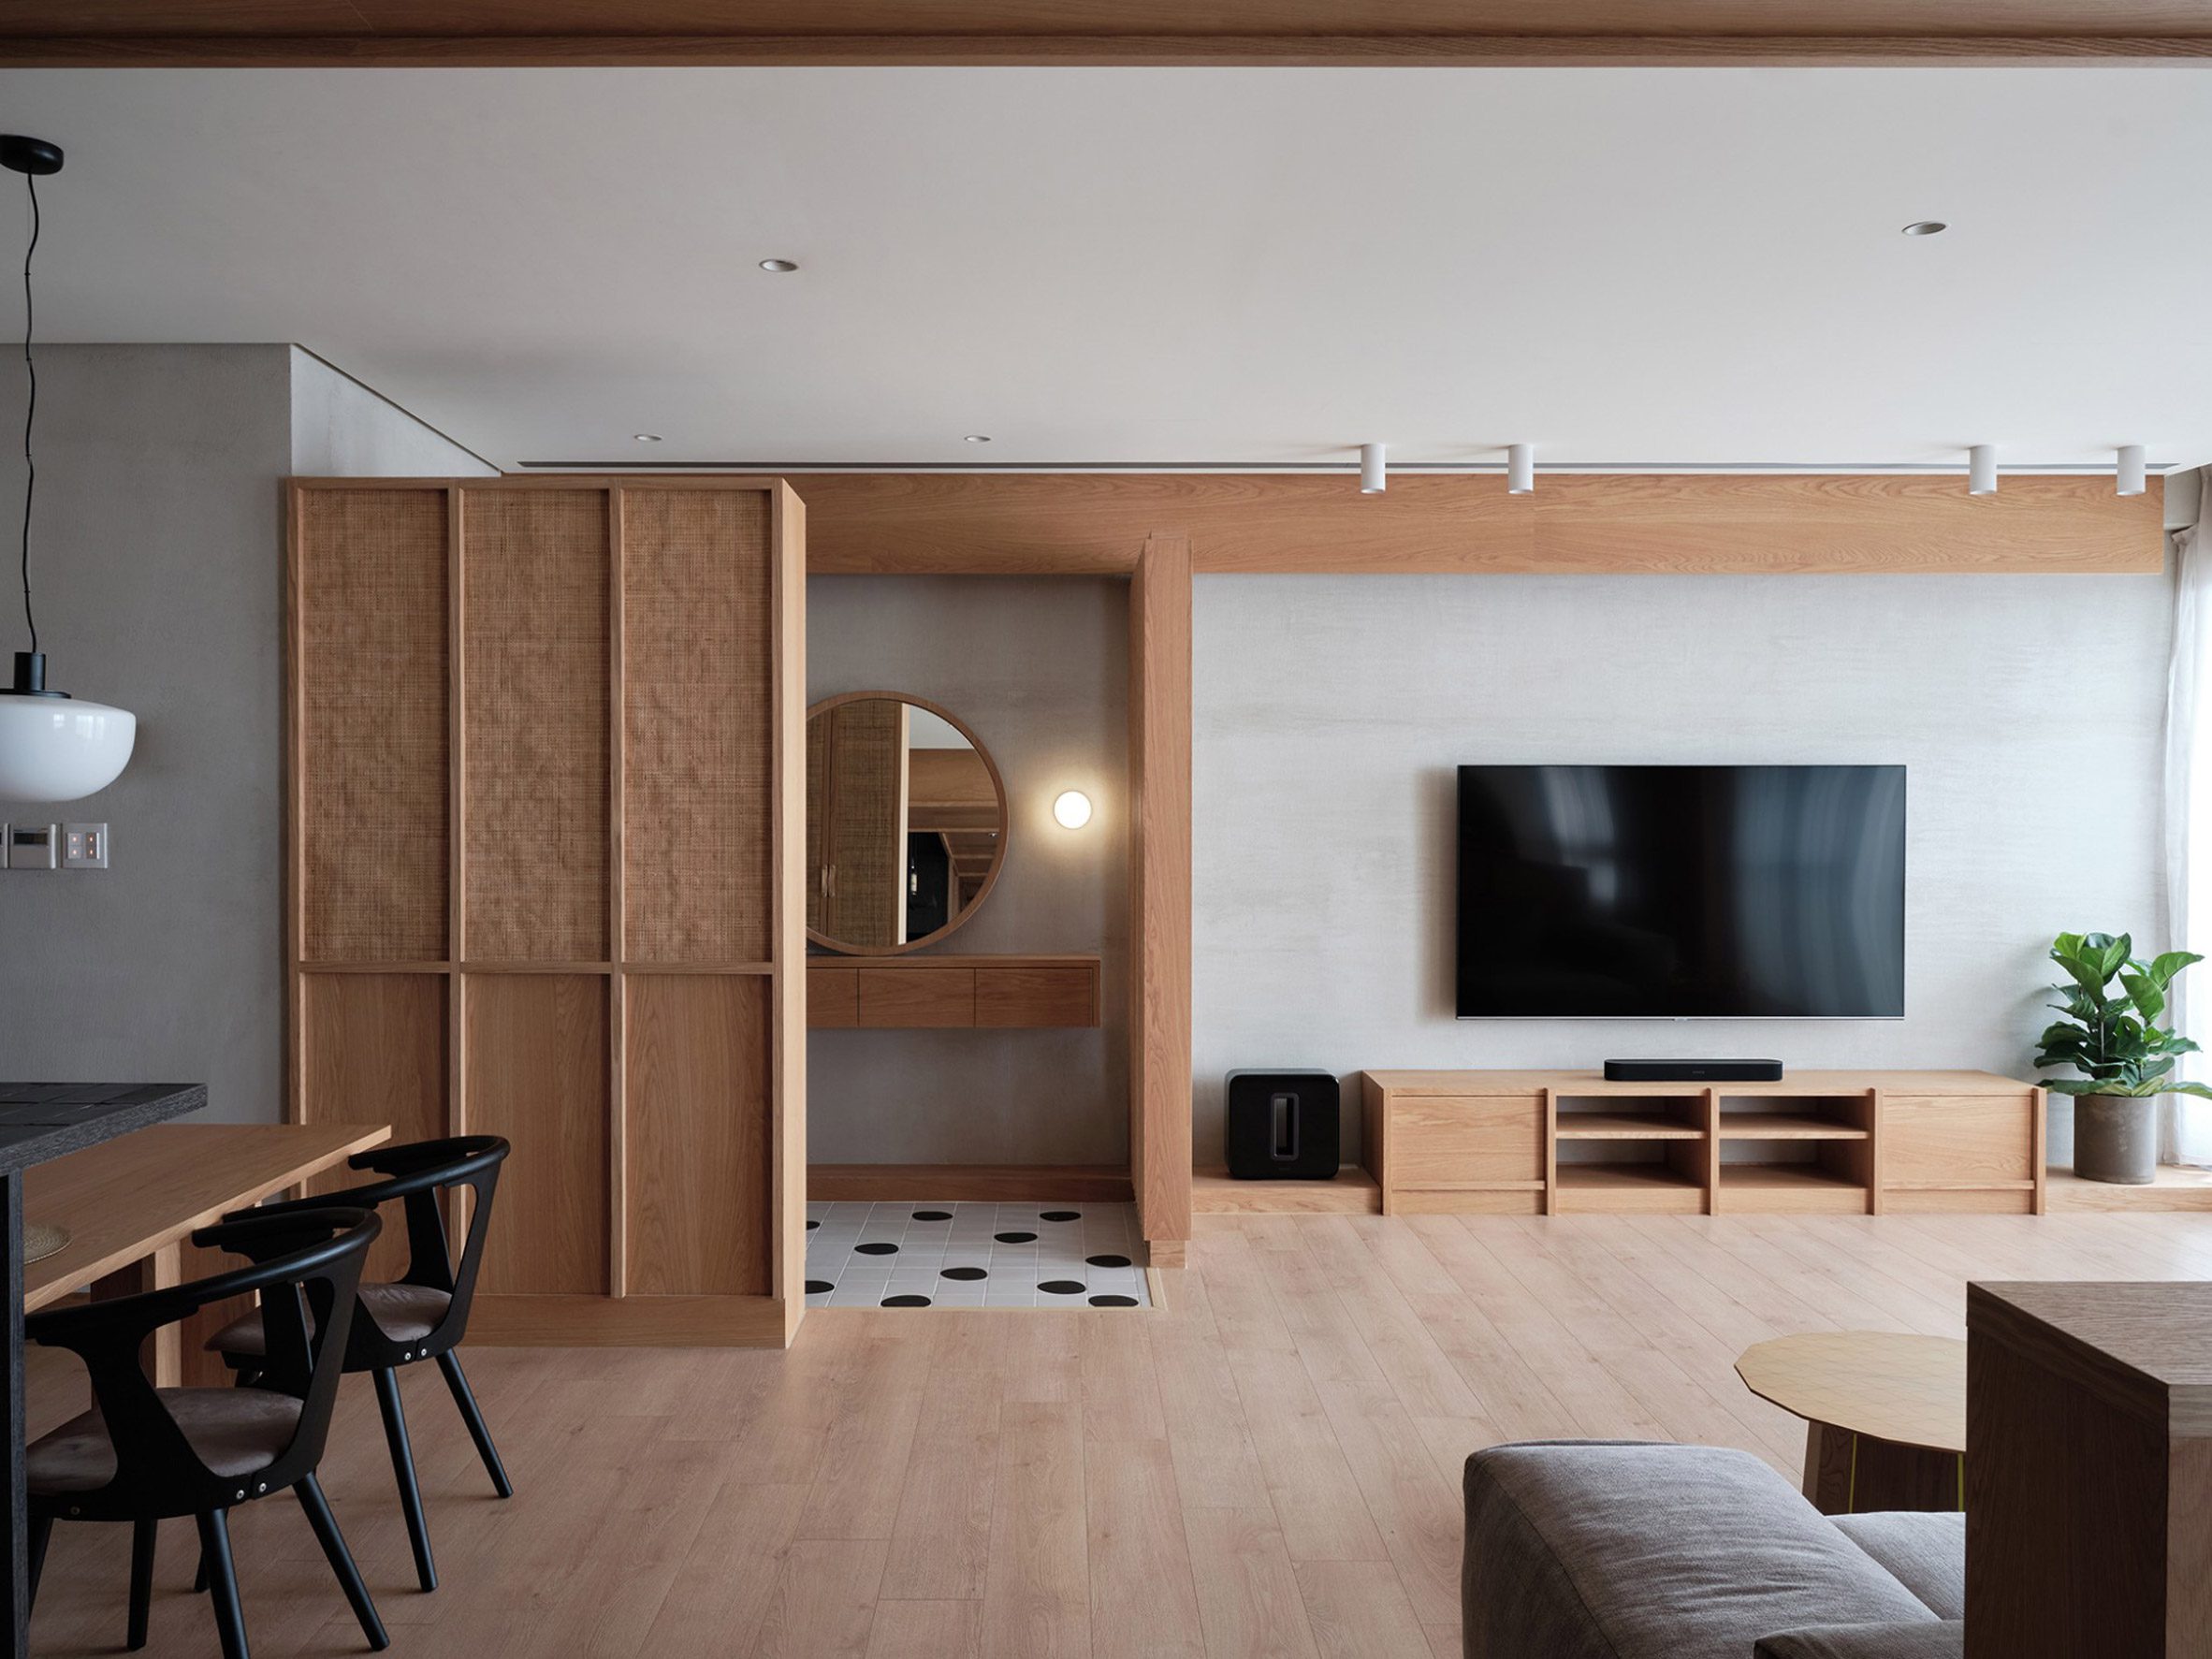 Living area and bathroom of Residence W divided by wooden screen